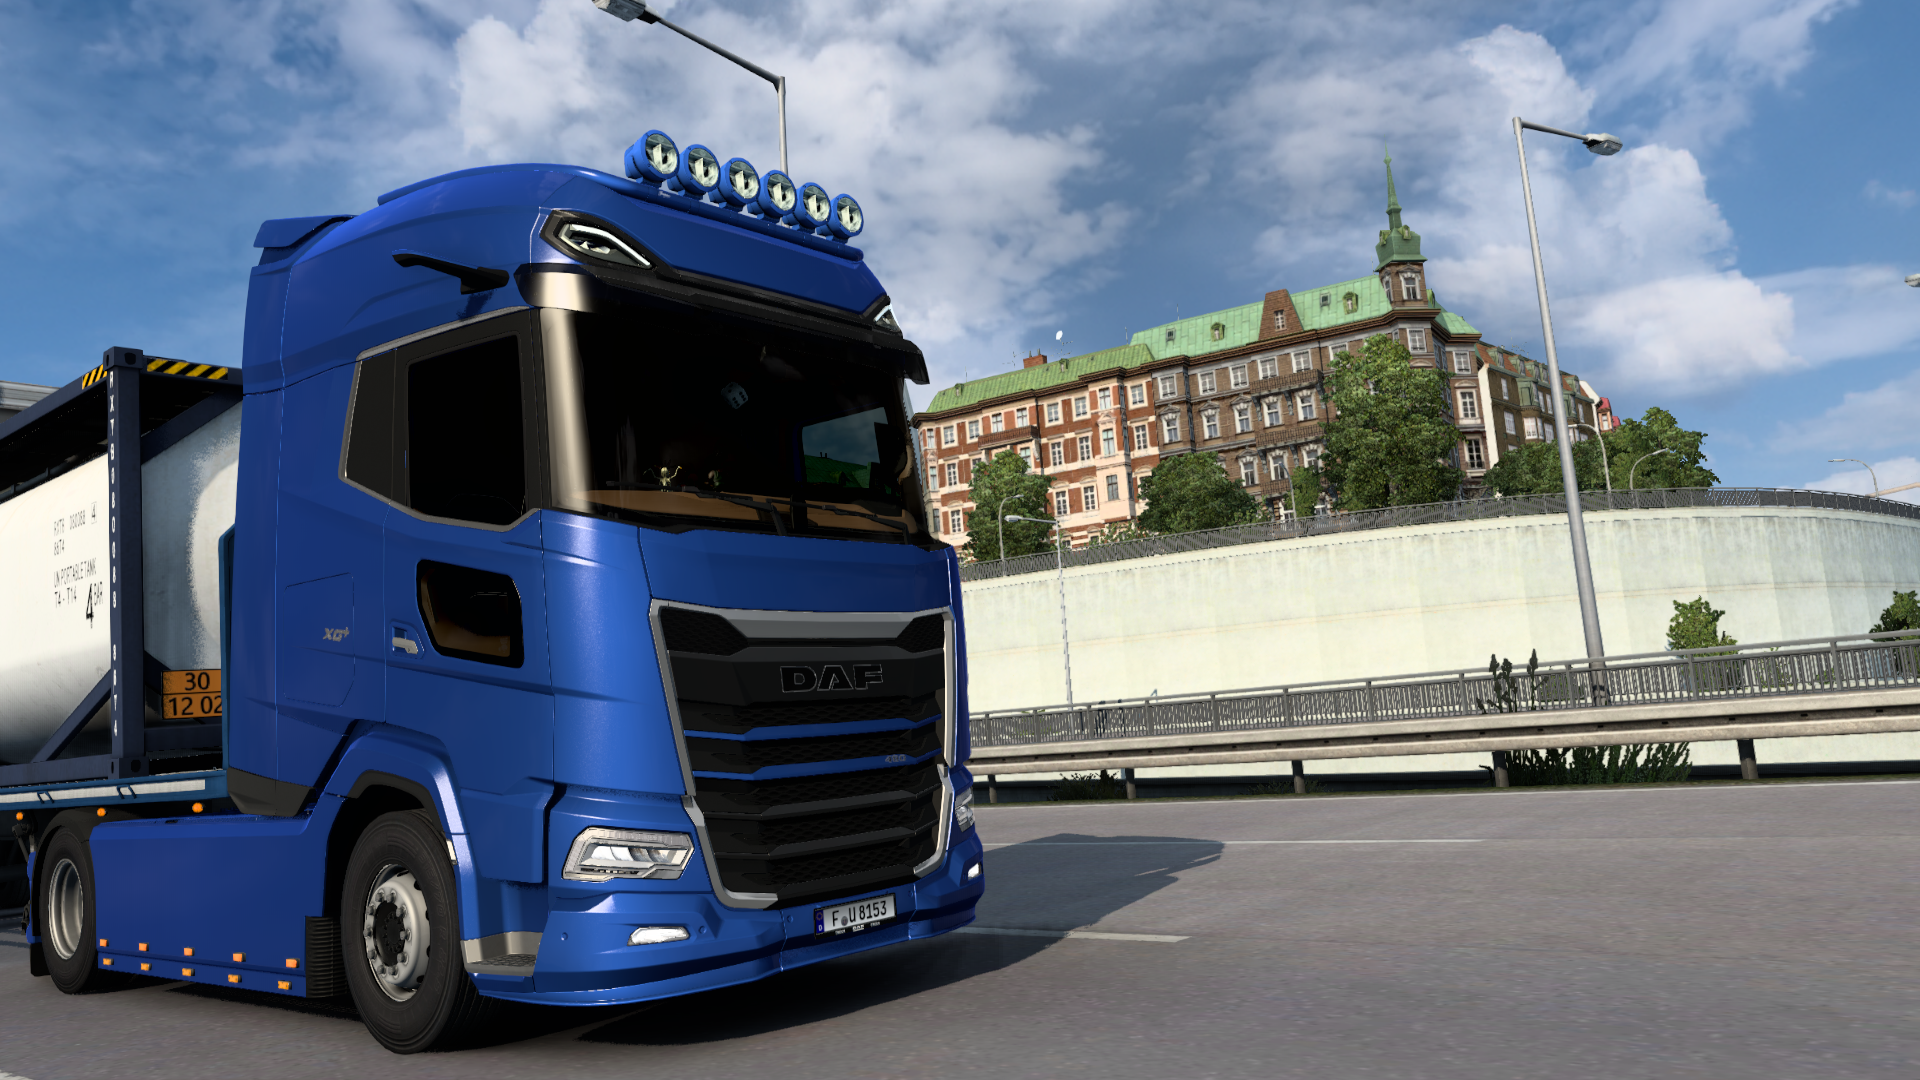 ets2_20230620_232655_00.png